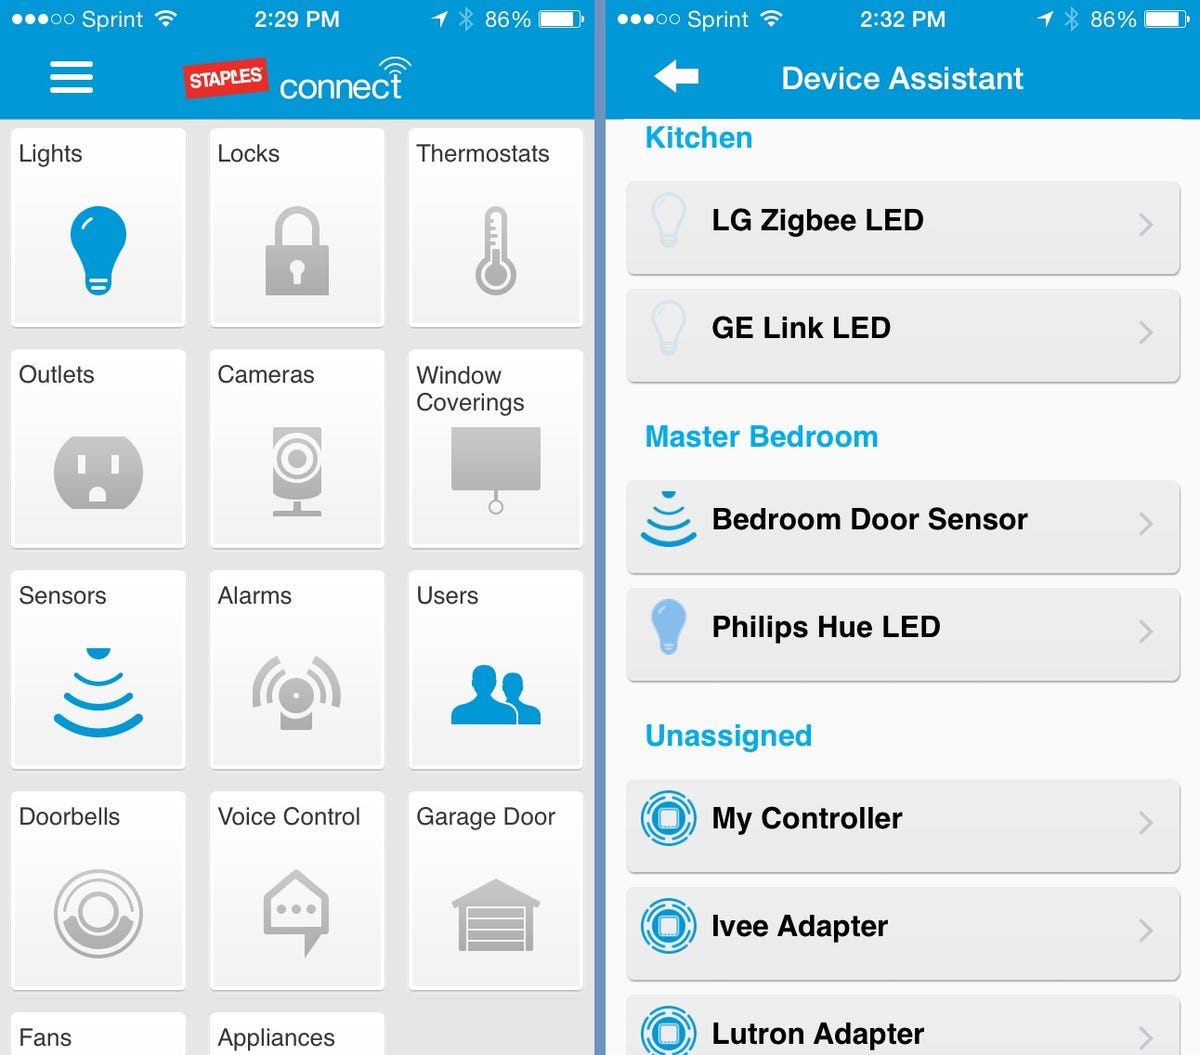 staples-connect-app-home-devices.jpg